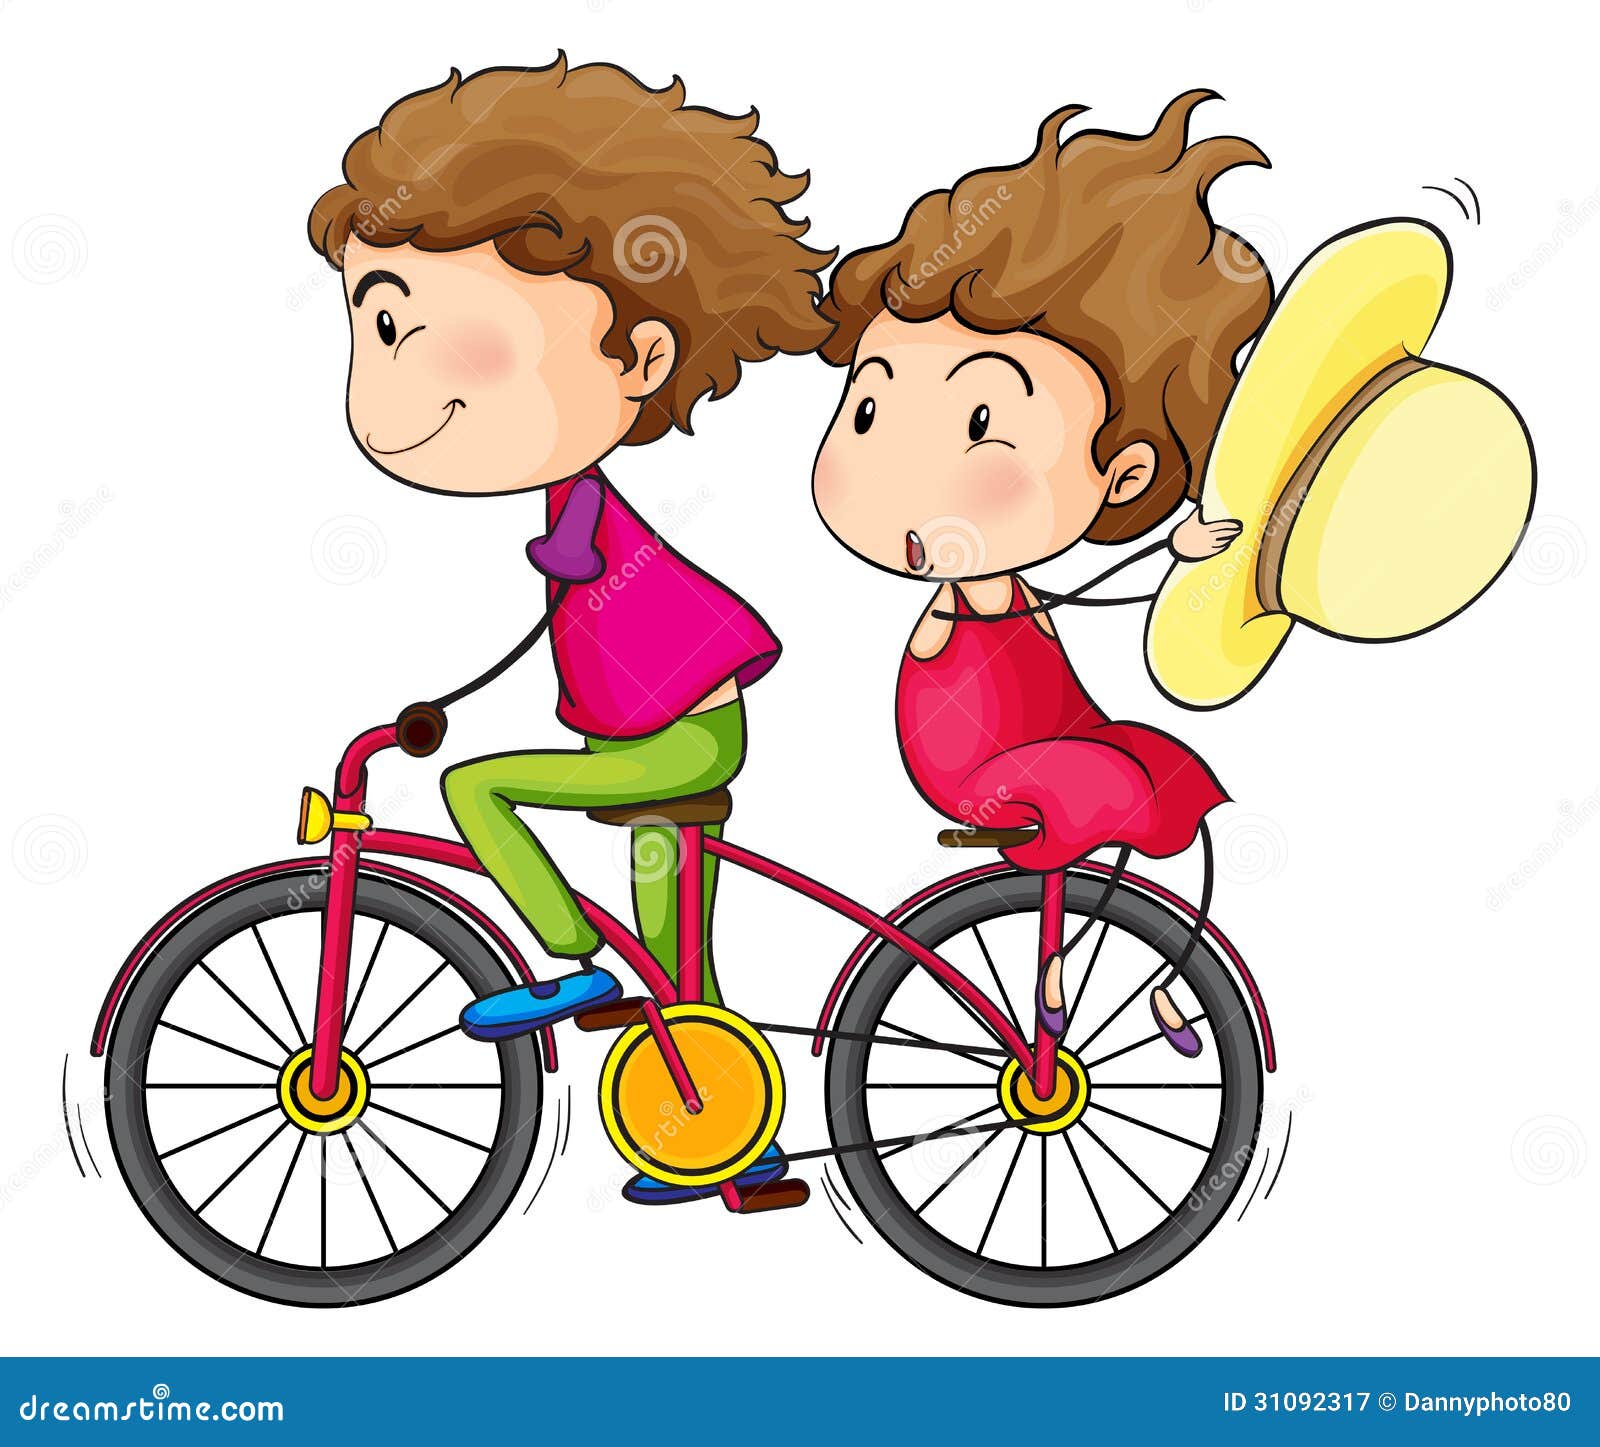 clipart girl riding bicycle - photo #26